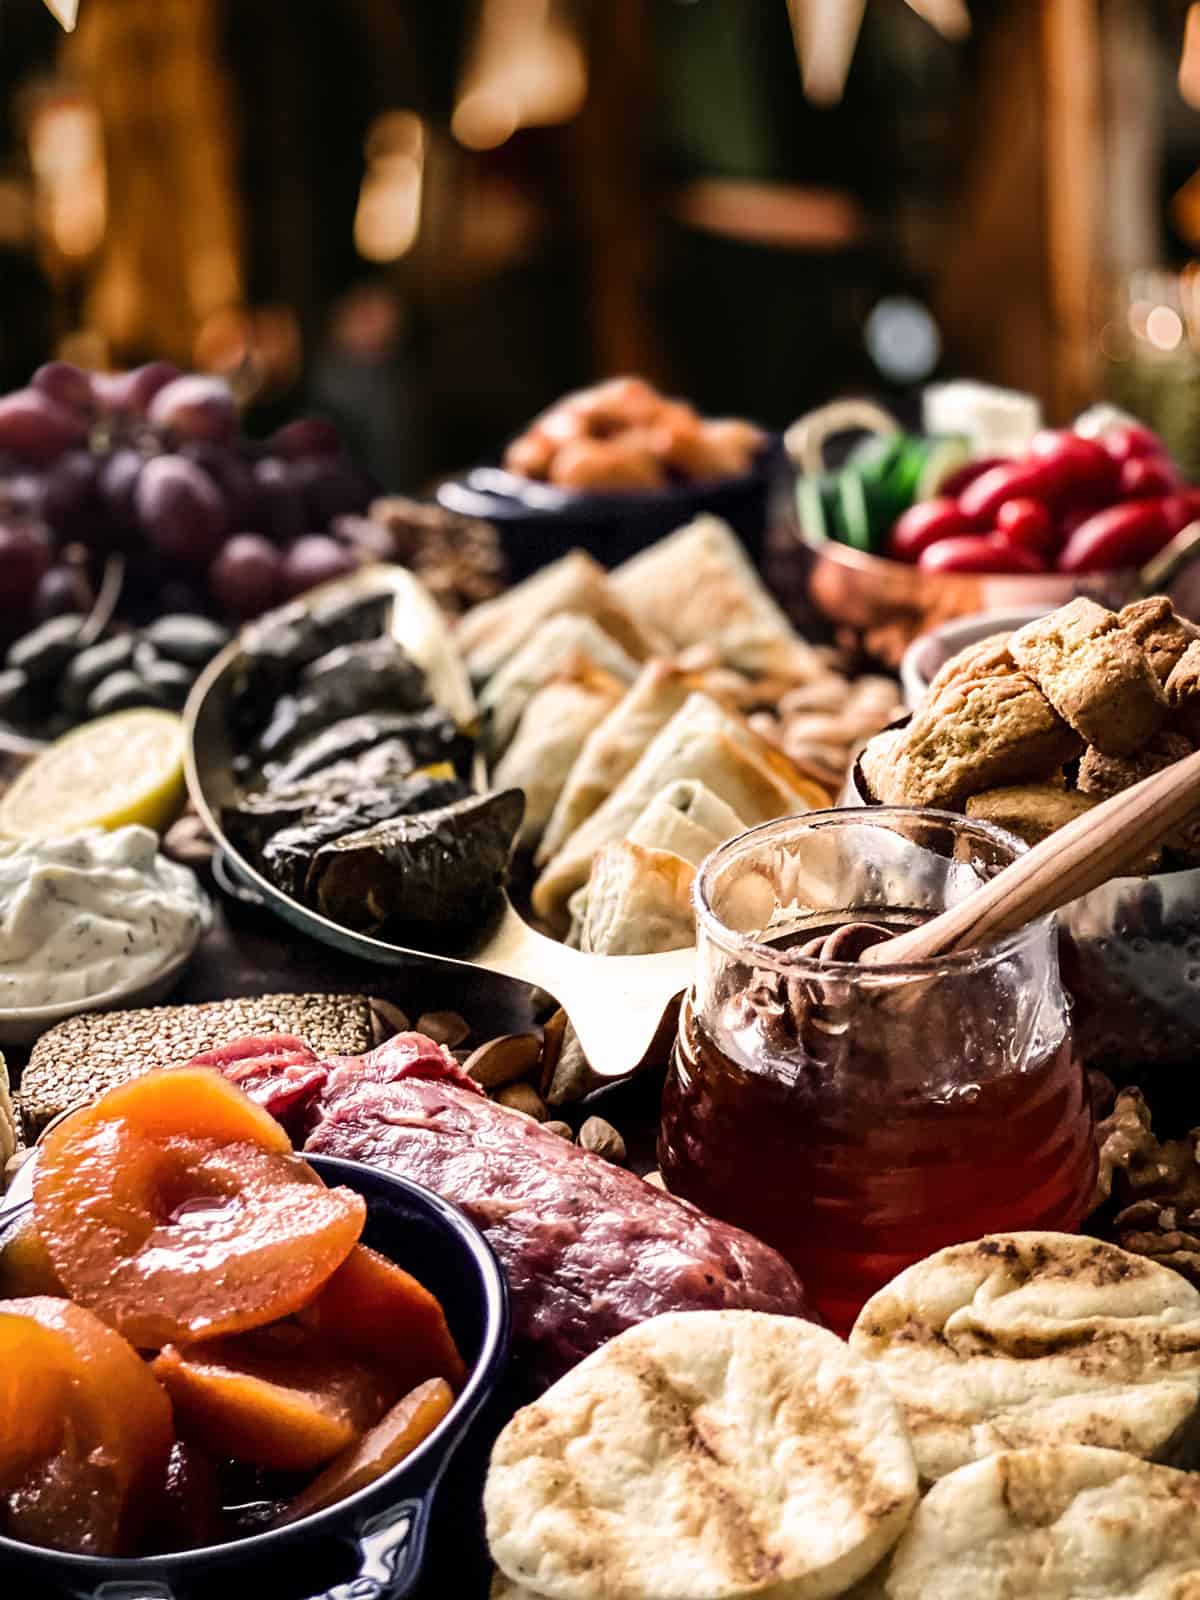 Grapes, walnuts, a small bowl with beans, a fish shaped bowl with dolmades, half a lemon, sliced salami, a pasteli bar, a pot with preserved apricots, a pot of honey, a small pot with fig preserves, some pistachios, round wafers, sliced cheese, and tzatziki dip.